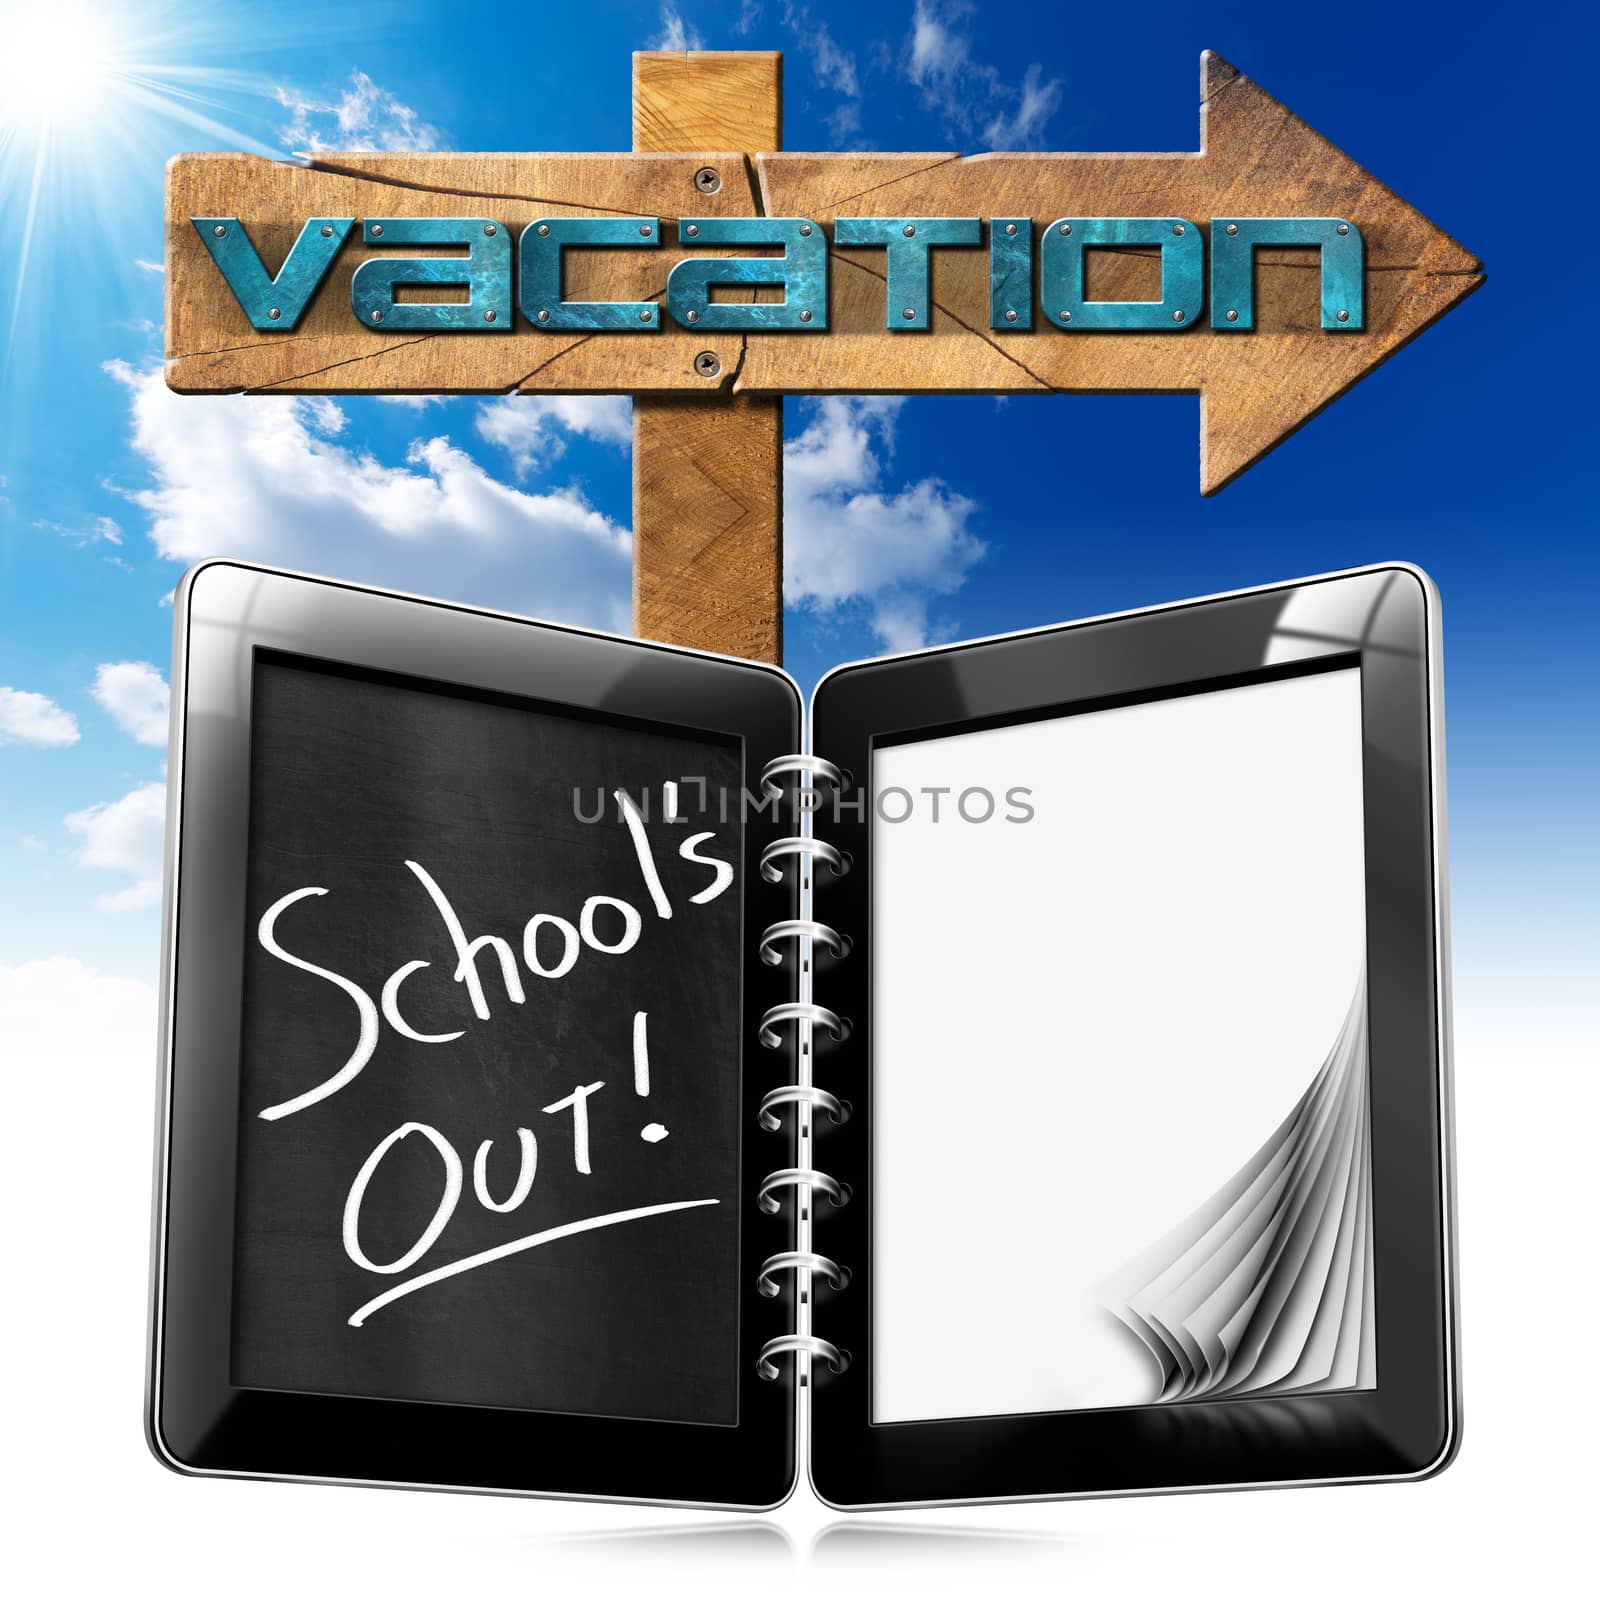 Tablet computer in the shape of exercise book with text, School’s out, wooden directional sign with text Vacation. On blue sky with clouds and sun rays